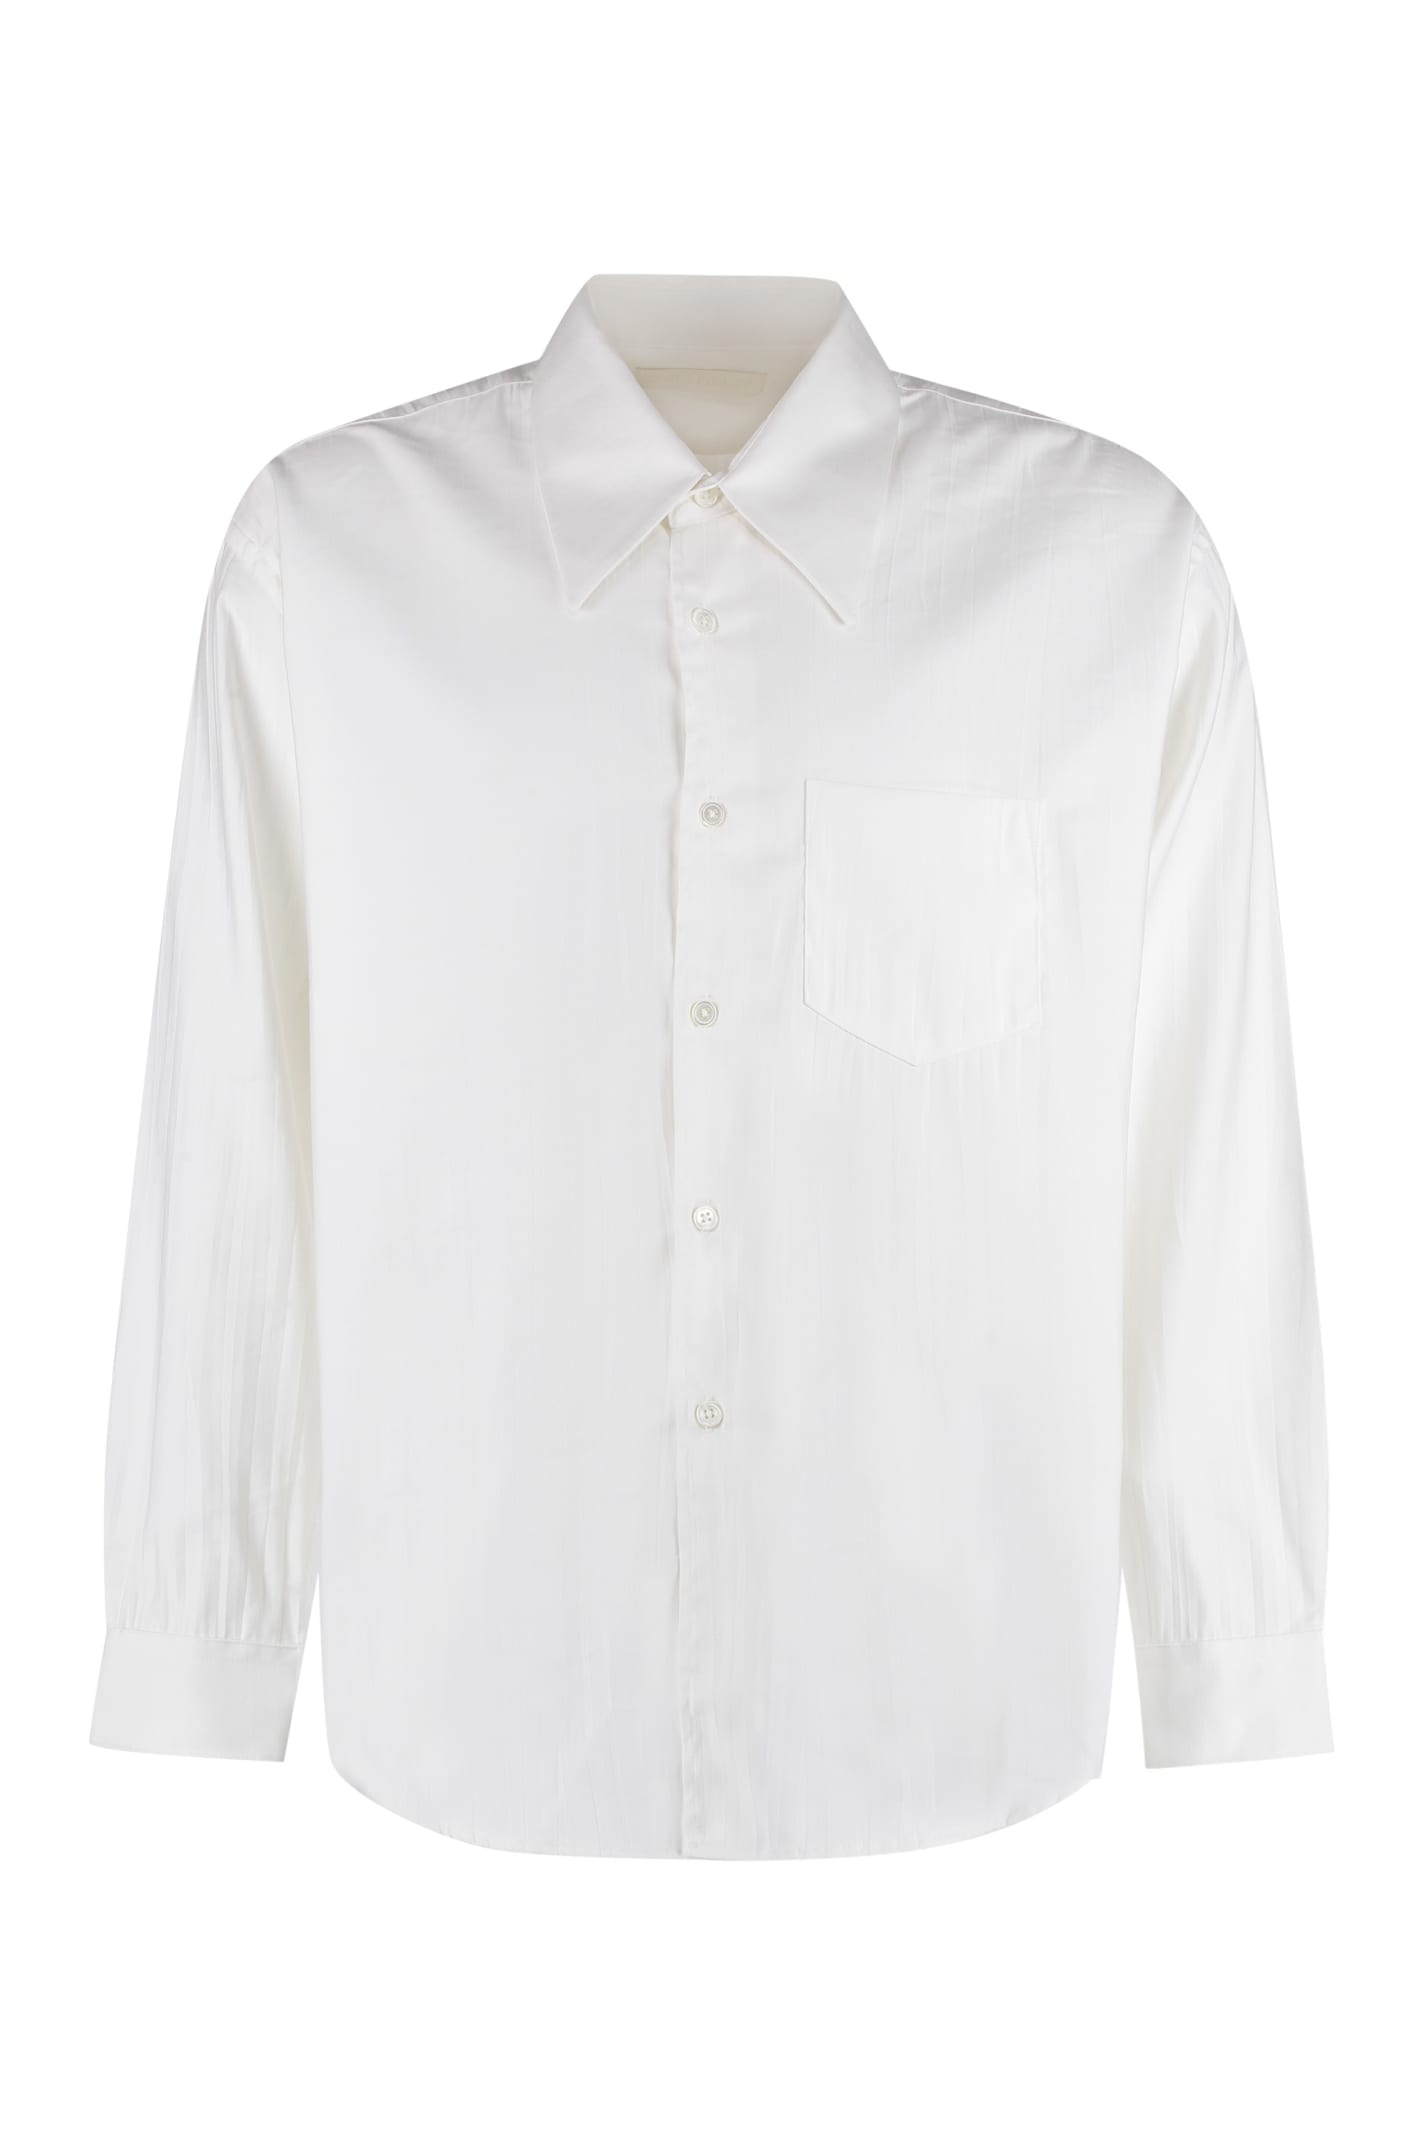 Our Legacy Coco 70s Viscose Shirt